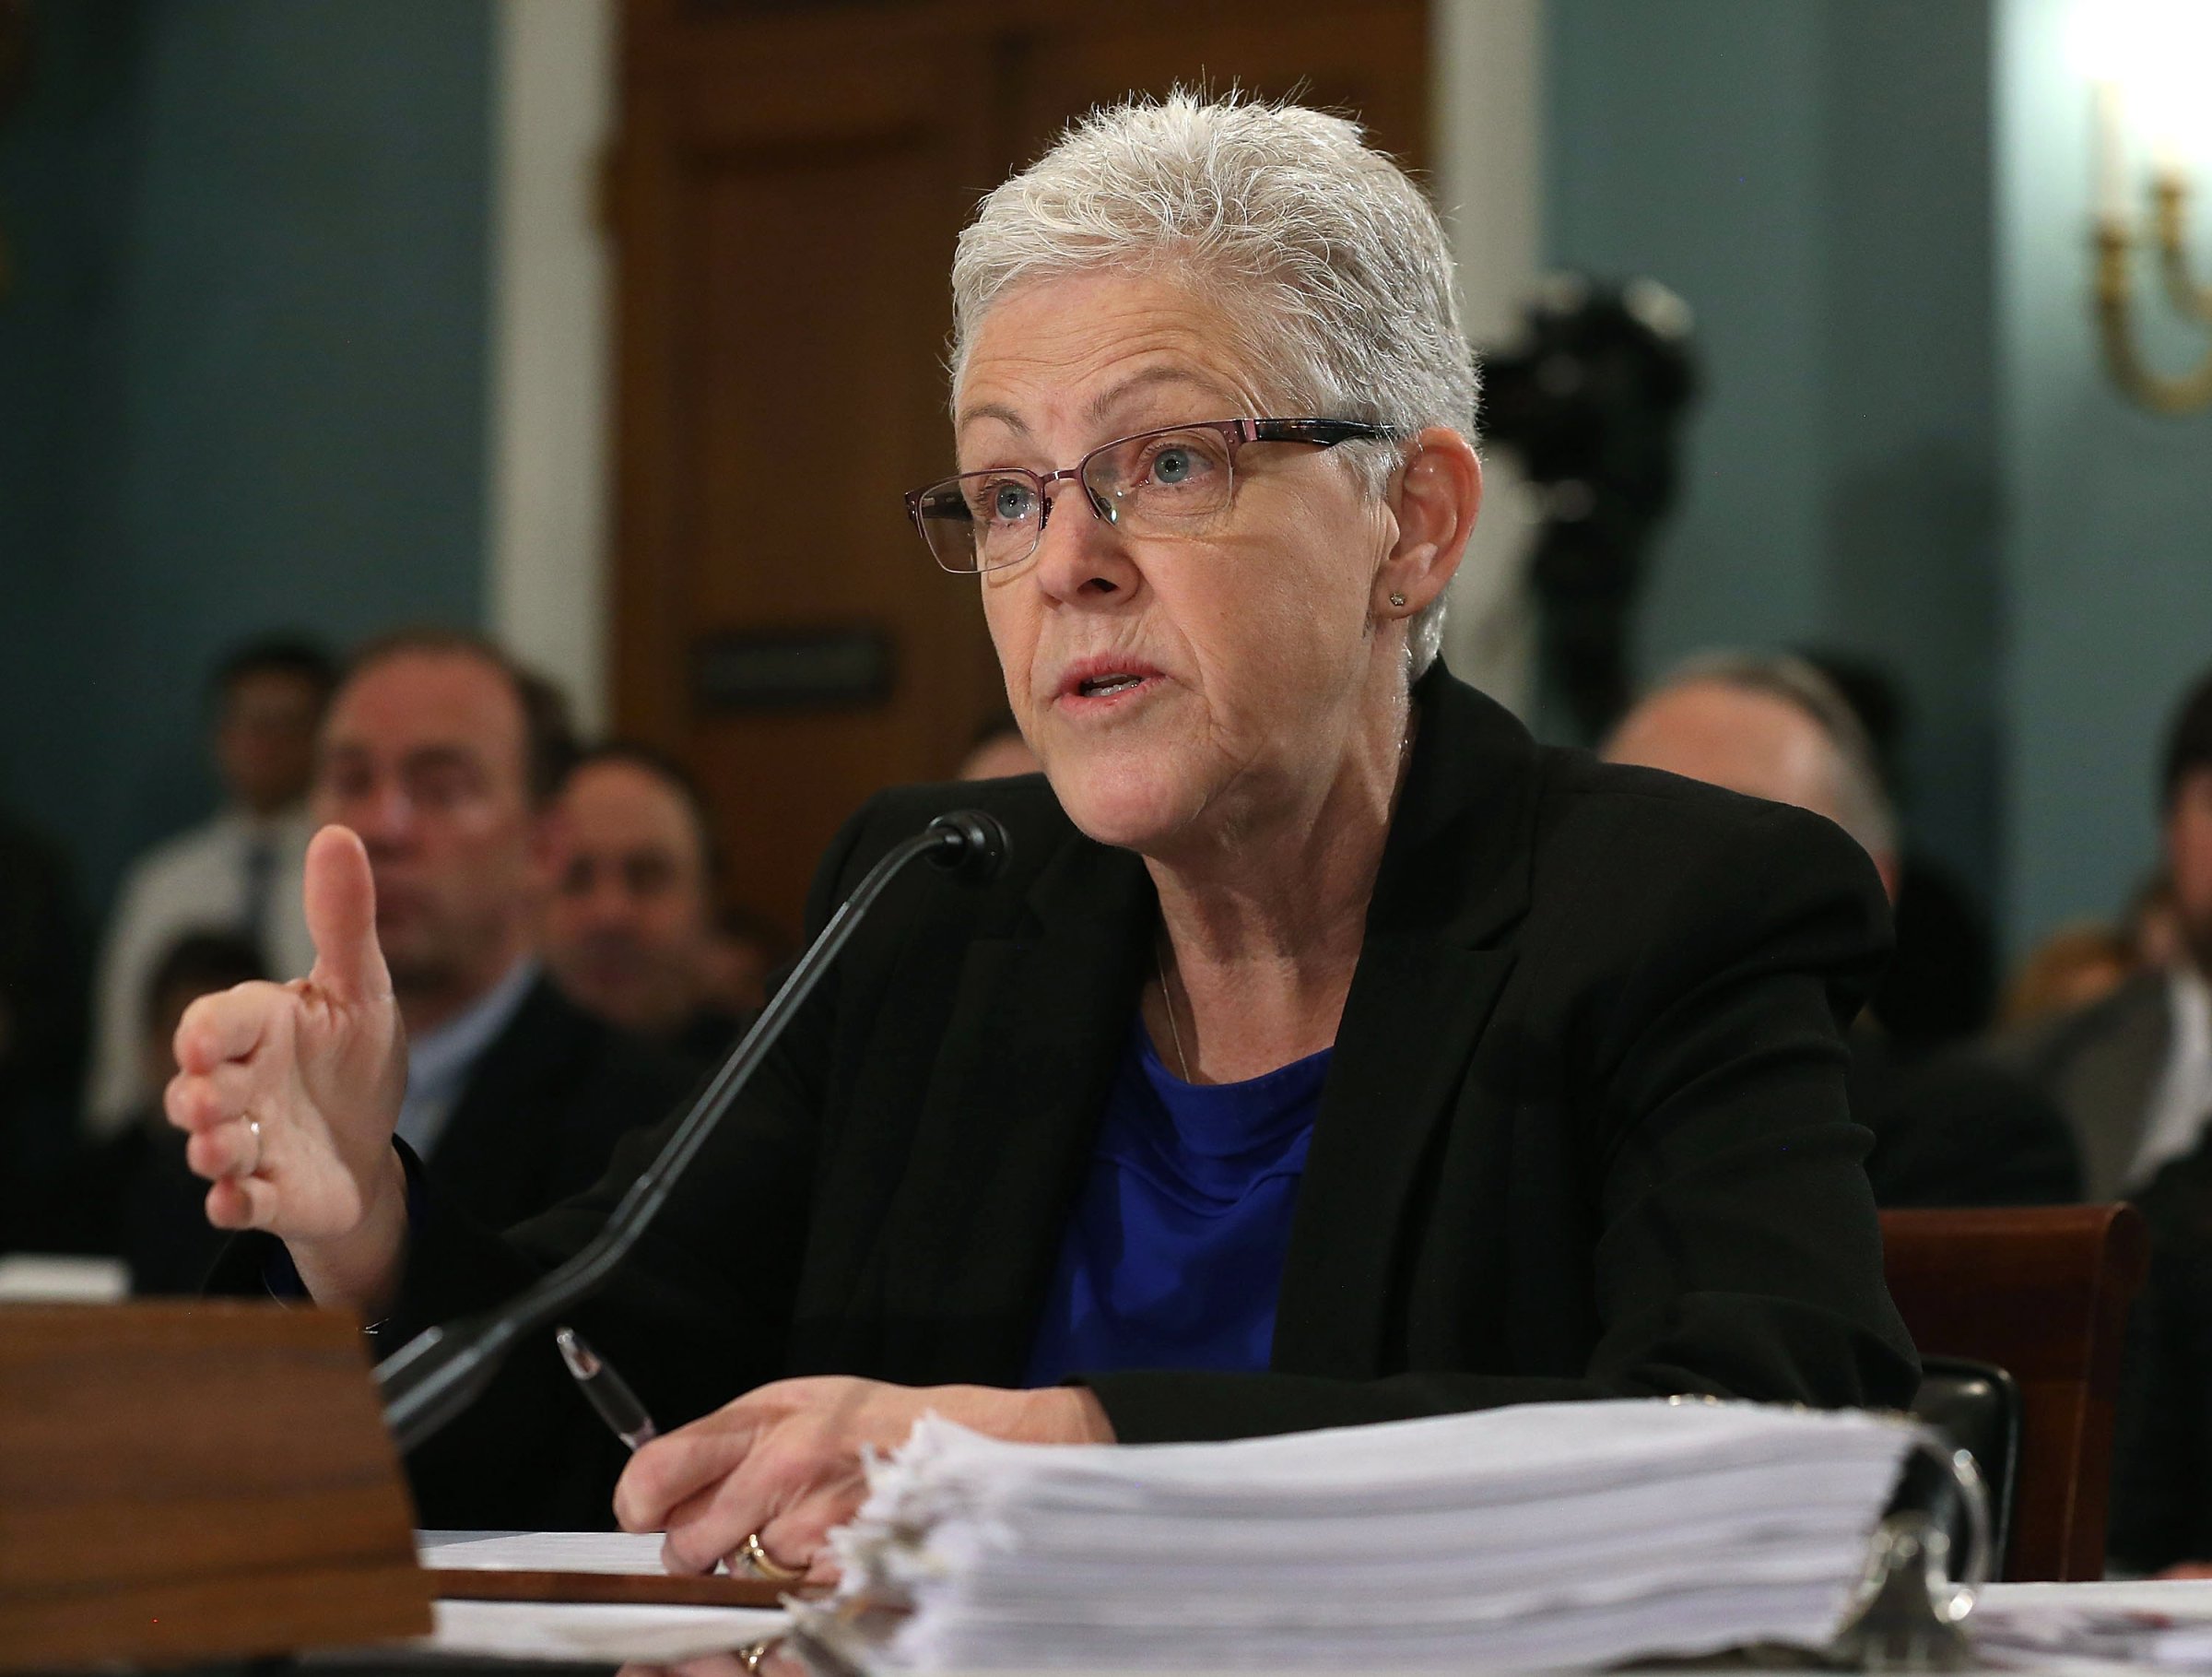 EPA Administrator Gina McCarthy testifies during a House Agriculture Committee hearing on Capitol Hill in Washington, DC. on Feb. 11, 2016.